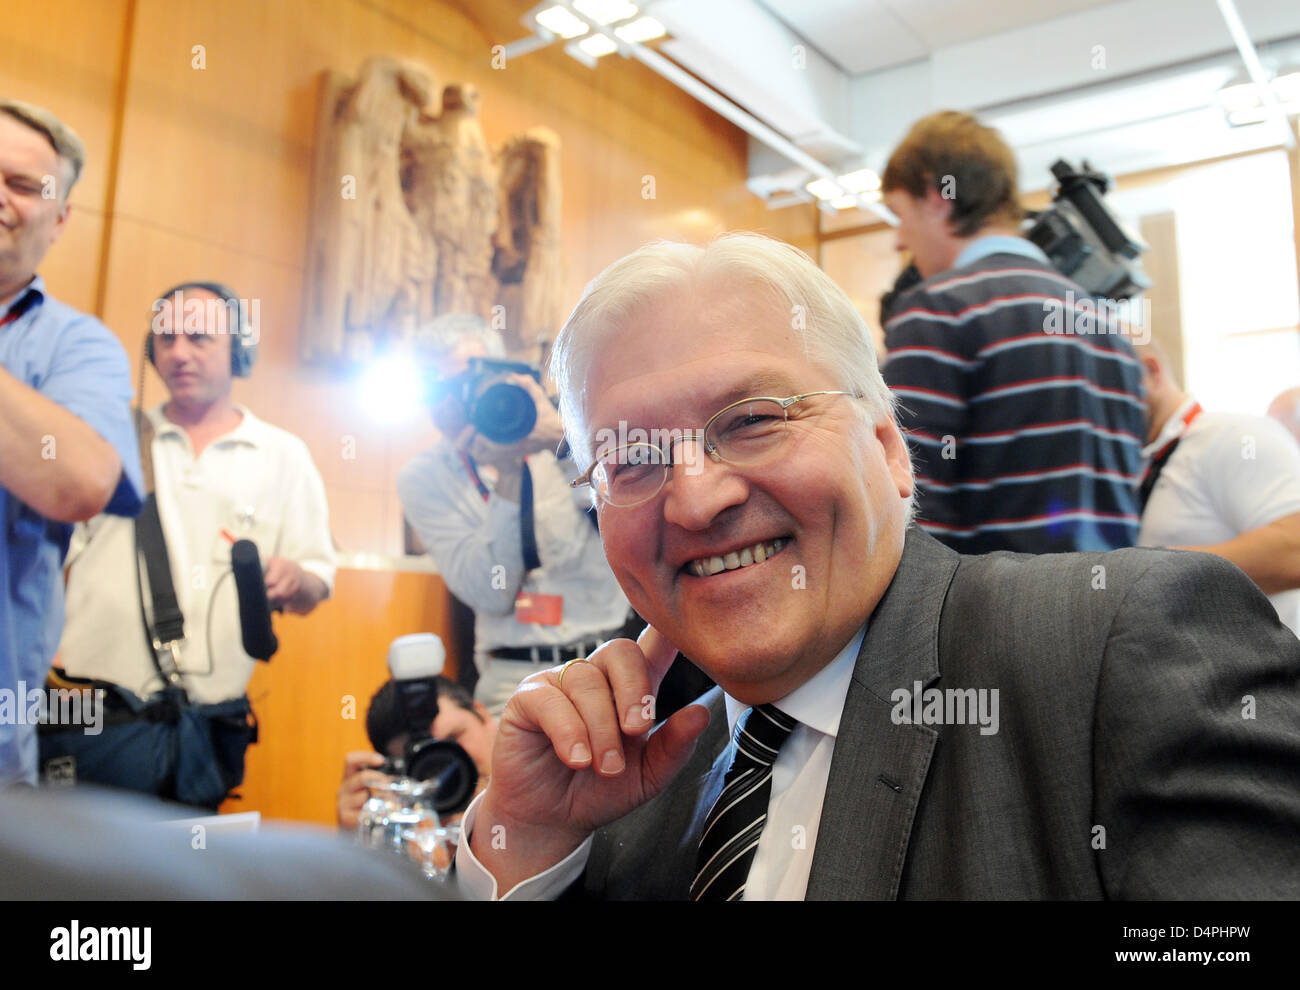 german Foreign Minister Frank-Walter Steinmeier smiles before the pronouncement of judgement by the Federal Constitutional Court (BVerfG) in Karlsruhe, Germany, 30 June 2009. Gauweiler says the EU?s Lisbon Treaty ?continues to hand over uncontrolled power to EU bodies?. The court demanded changes to German federal legislation before the Lisbon Treaty could be ratified. Germany?s ac Stock Photo